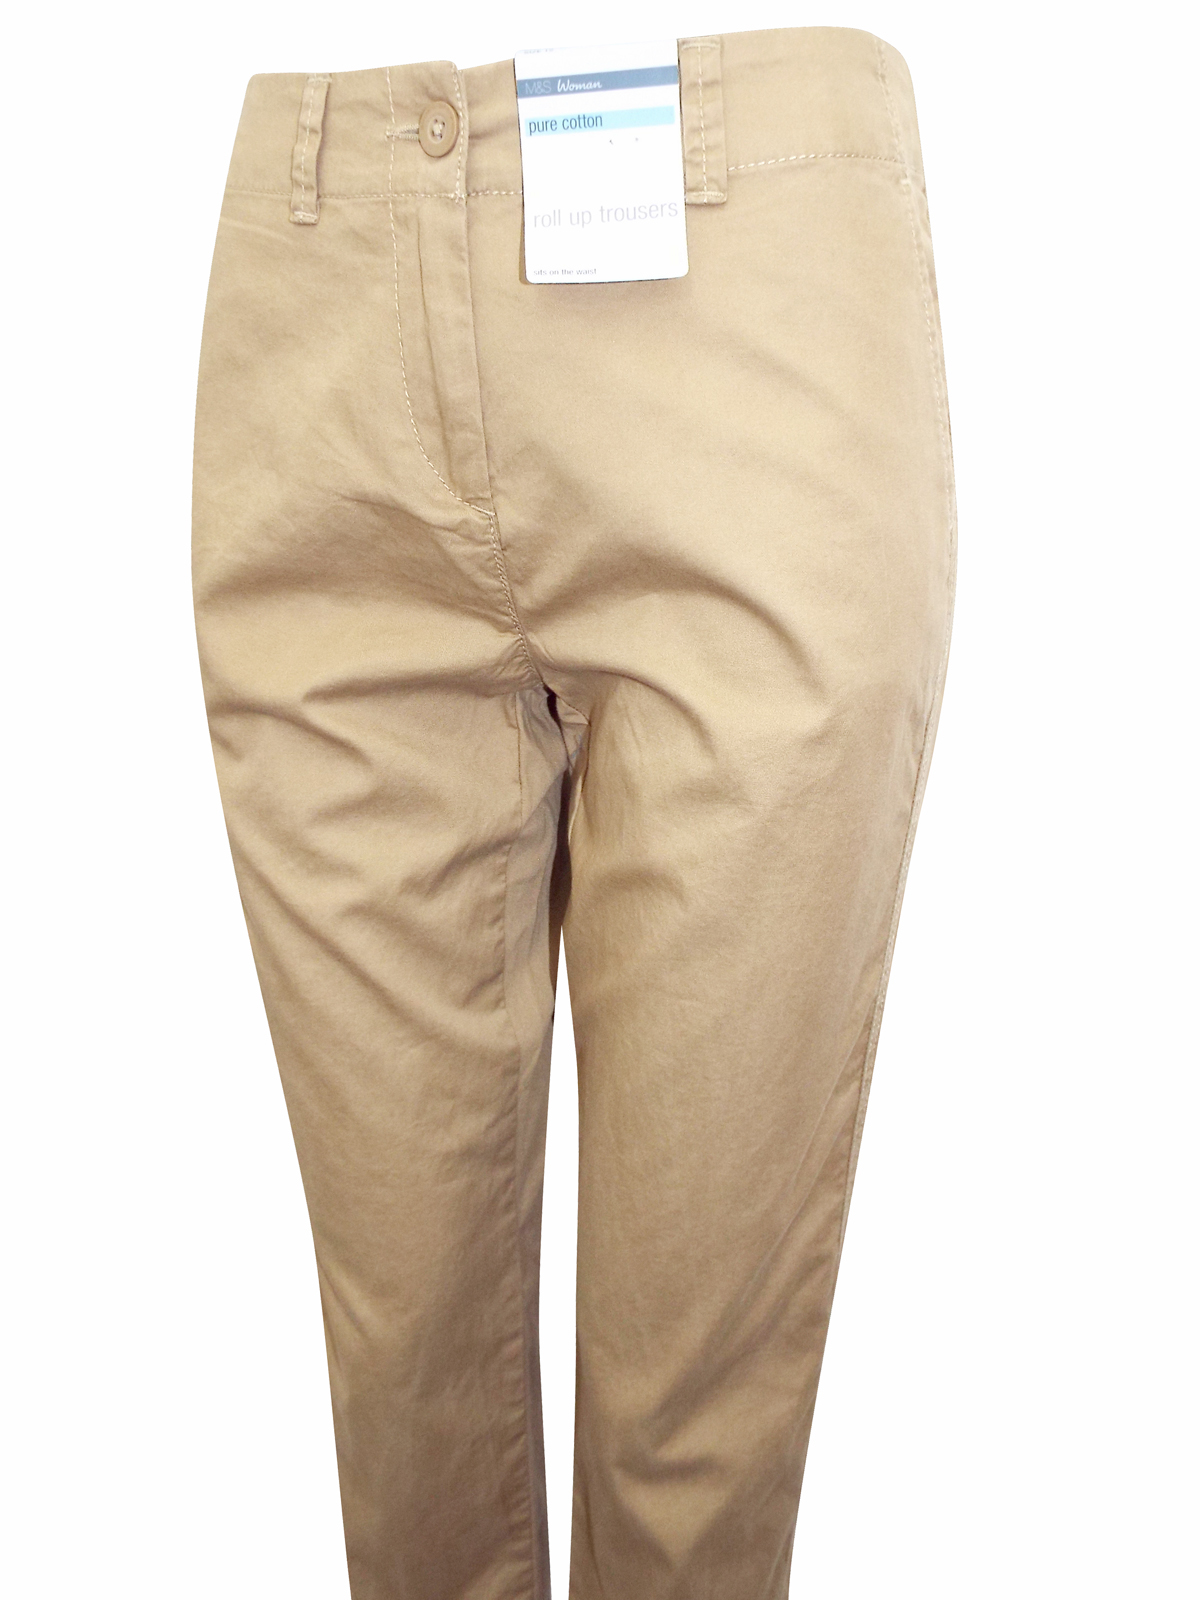 Marks and Spencer - - M&5 TOFFEE Pure Cotton Roll Up Chinos - Size 12 to 14